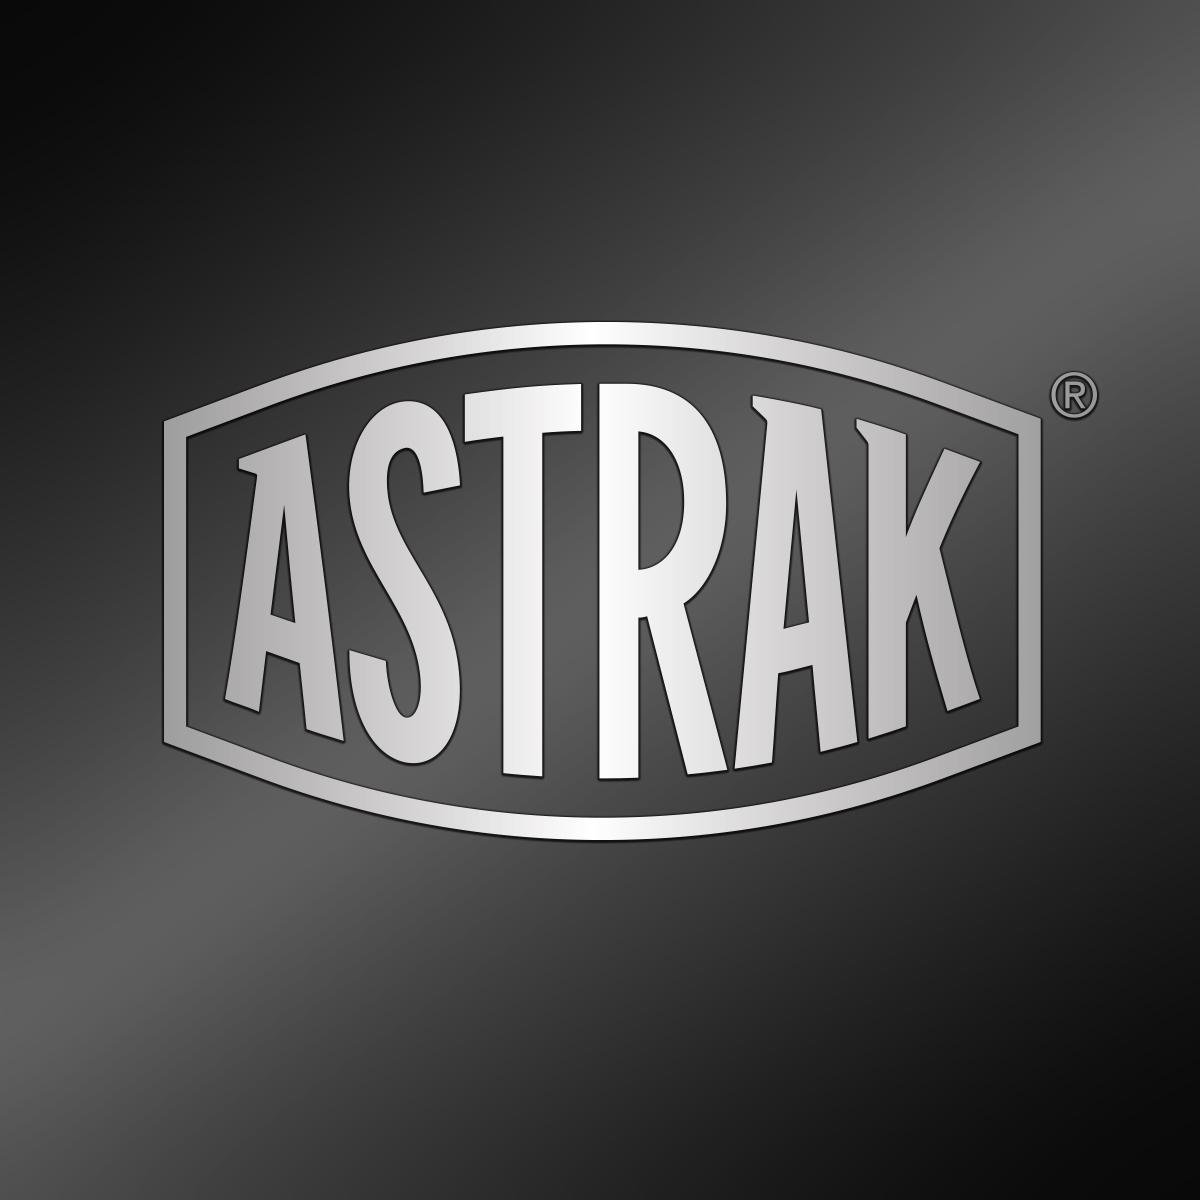 Astrak is one of Europe’s leading suppliers of undercarriage parts and GET products for excavators, mini excavators, bulldozers and other tracked equipment.